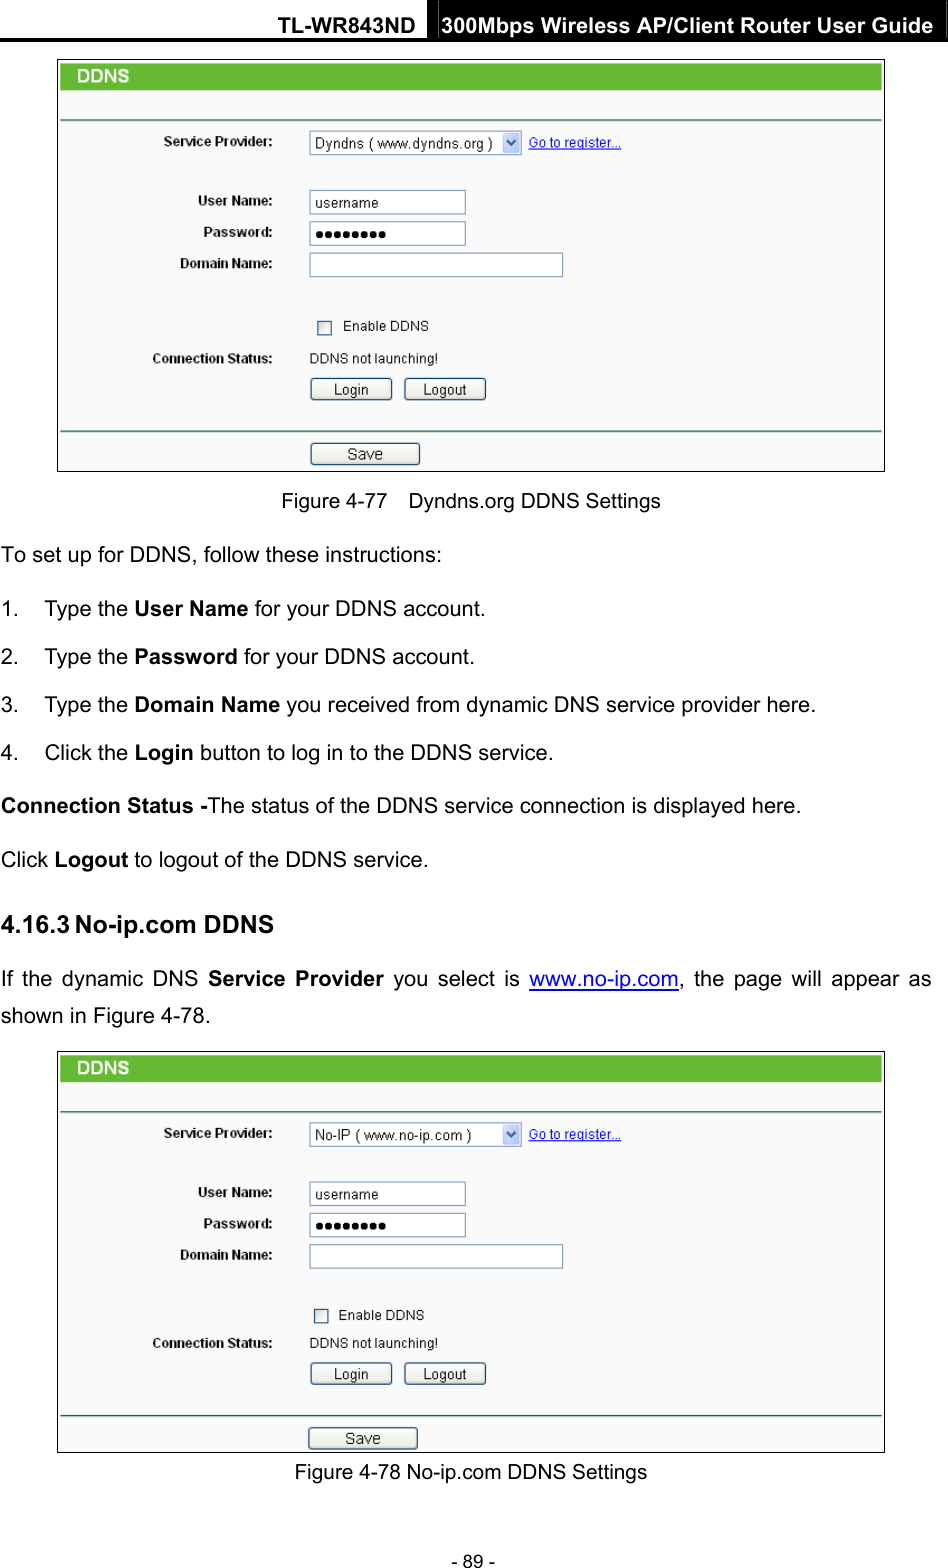 TL-WR843ND 300Mbps Wireless AP/Client Router User Guide - 89 -  Figure 4-77    Dyndns.org DDNS Settings To set up for DDNS, follow these instructions: 1. Type the User Name for your DDNS account.   2. Type the Password for your DDNS account.   3. Type the Domain Name you received from dynamic DNS service provider here.   4. Click the Login button to log in to the DDNS service. Connection Status -The status of the DDNS service connection is displayed here. Click Logout to logout of the DDNS service.   4.16.3 No-ip.com DDNS If the dynamic DNS Service Provider you select is www.no-ip.com, the page will appear as shown in Figure 4-78.  Figure 4-78 No-ip.com DDNS Settings 